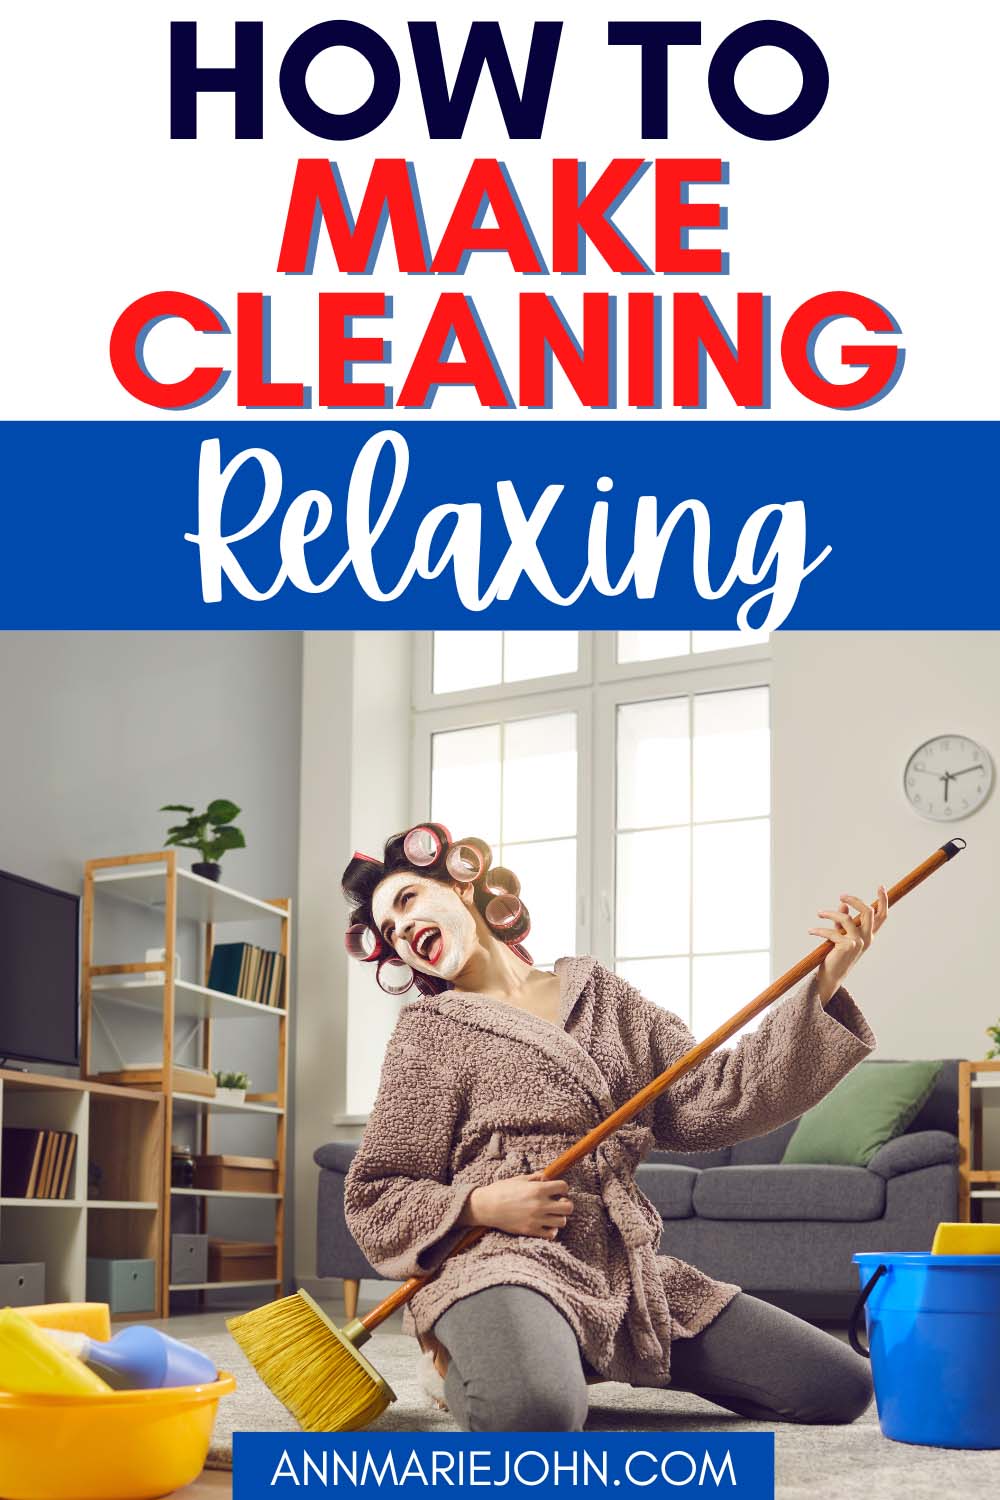 How to Make Cleaning Relaxing